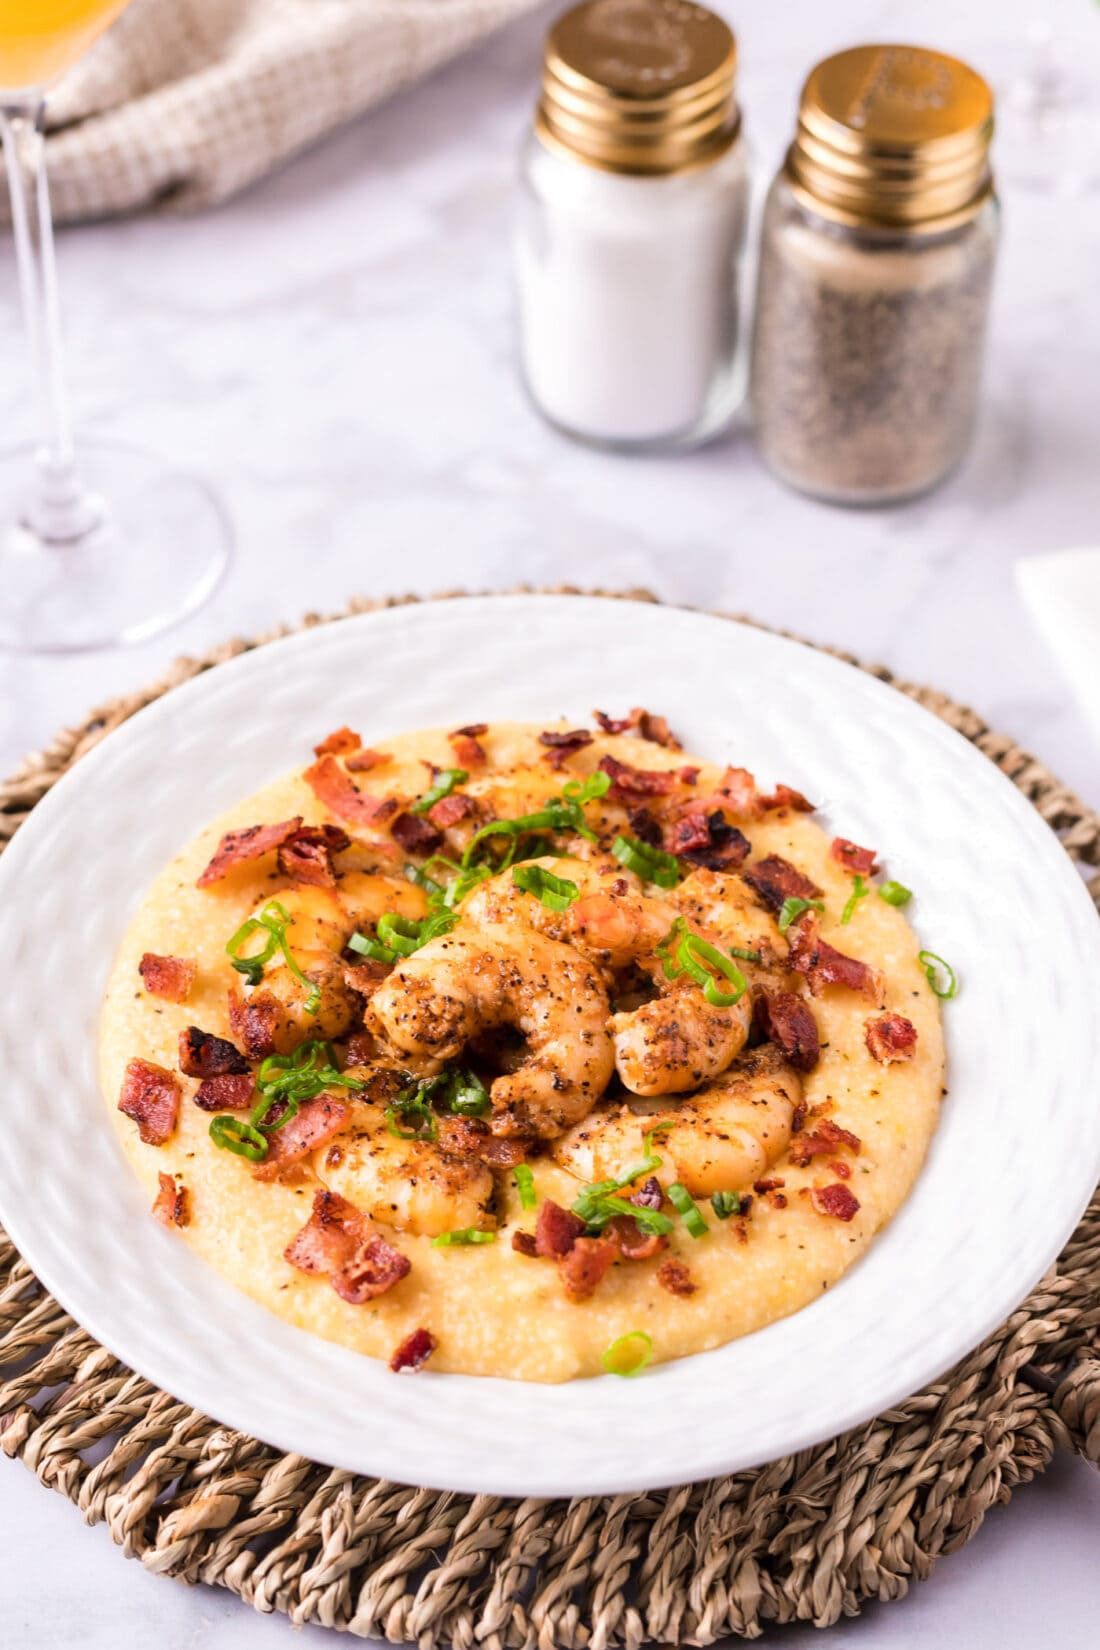 Plate of Shrimp and Grits